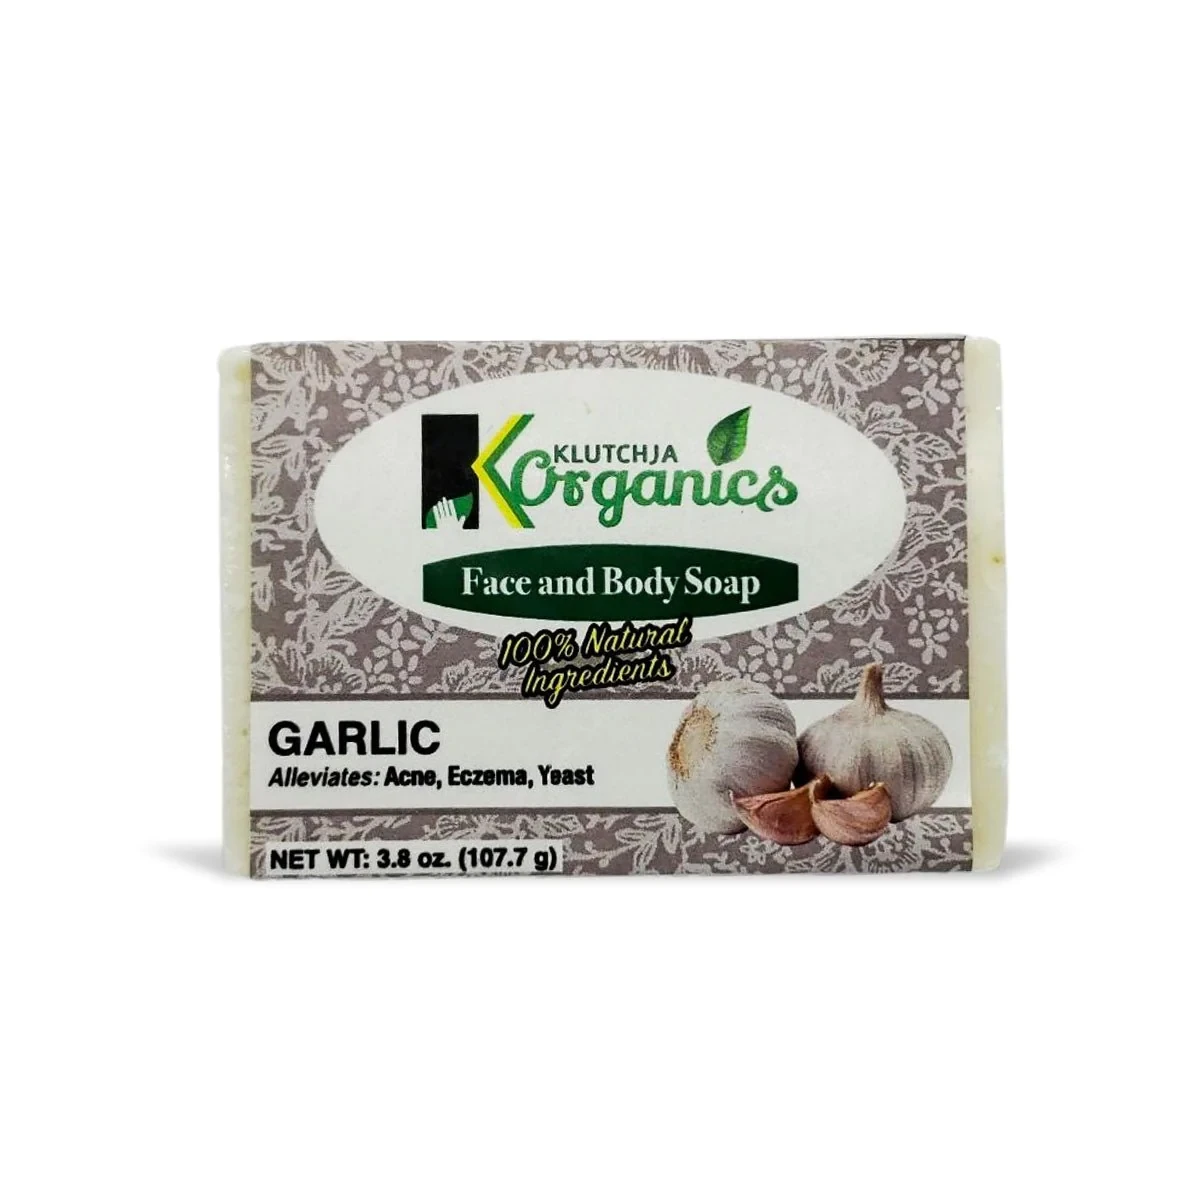 Klutchja Organices Garlic Face And Body Soap